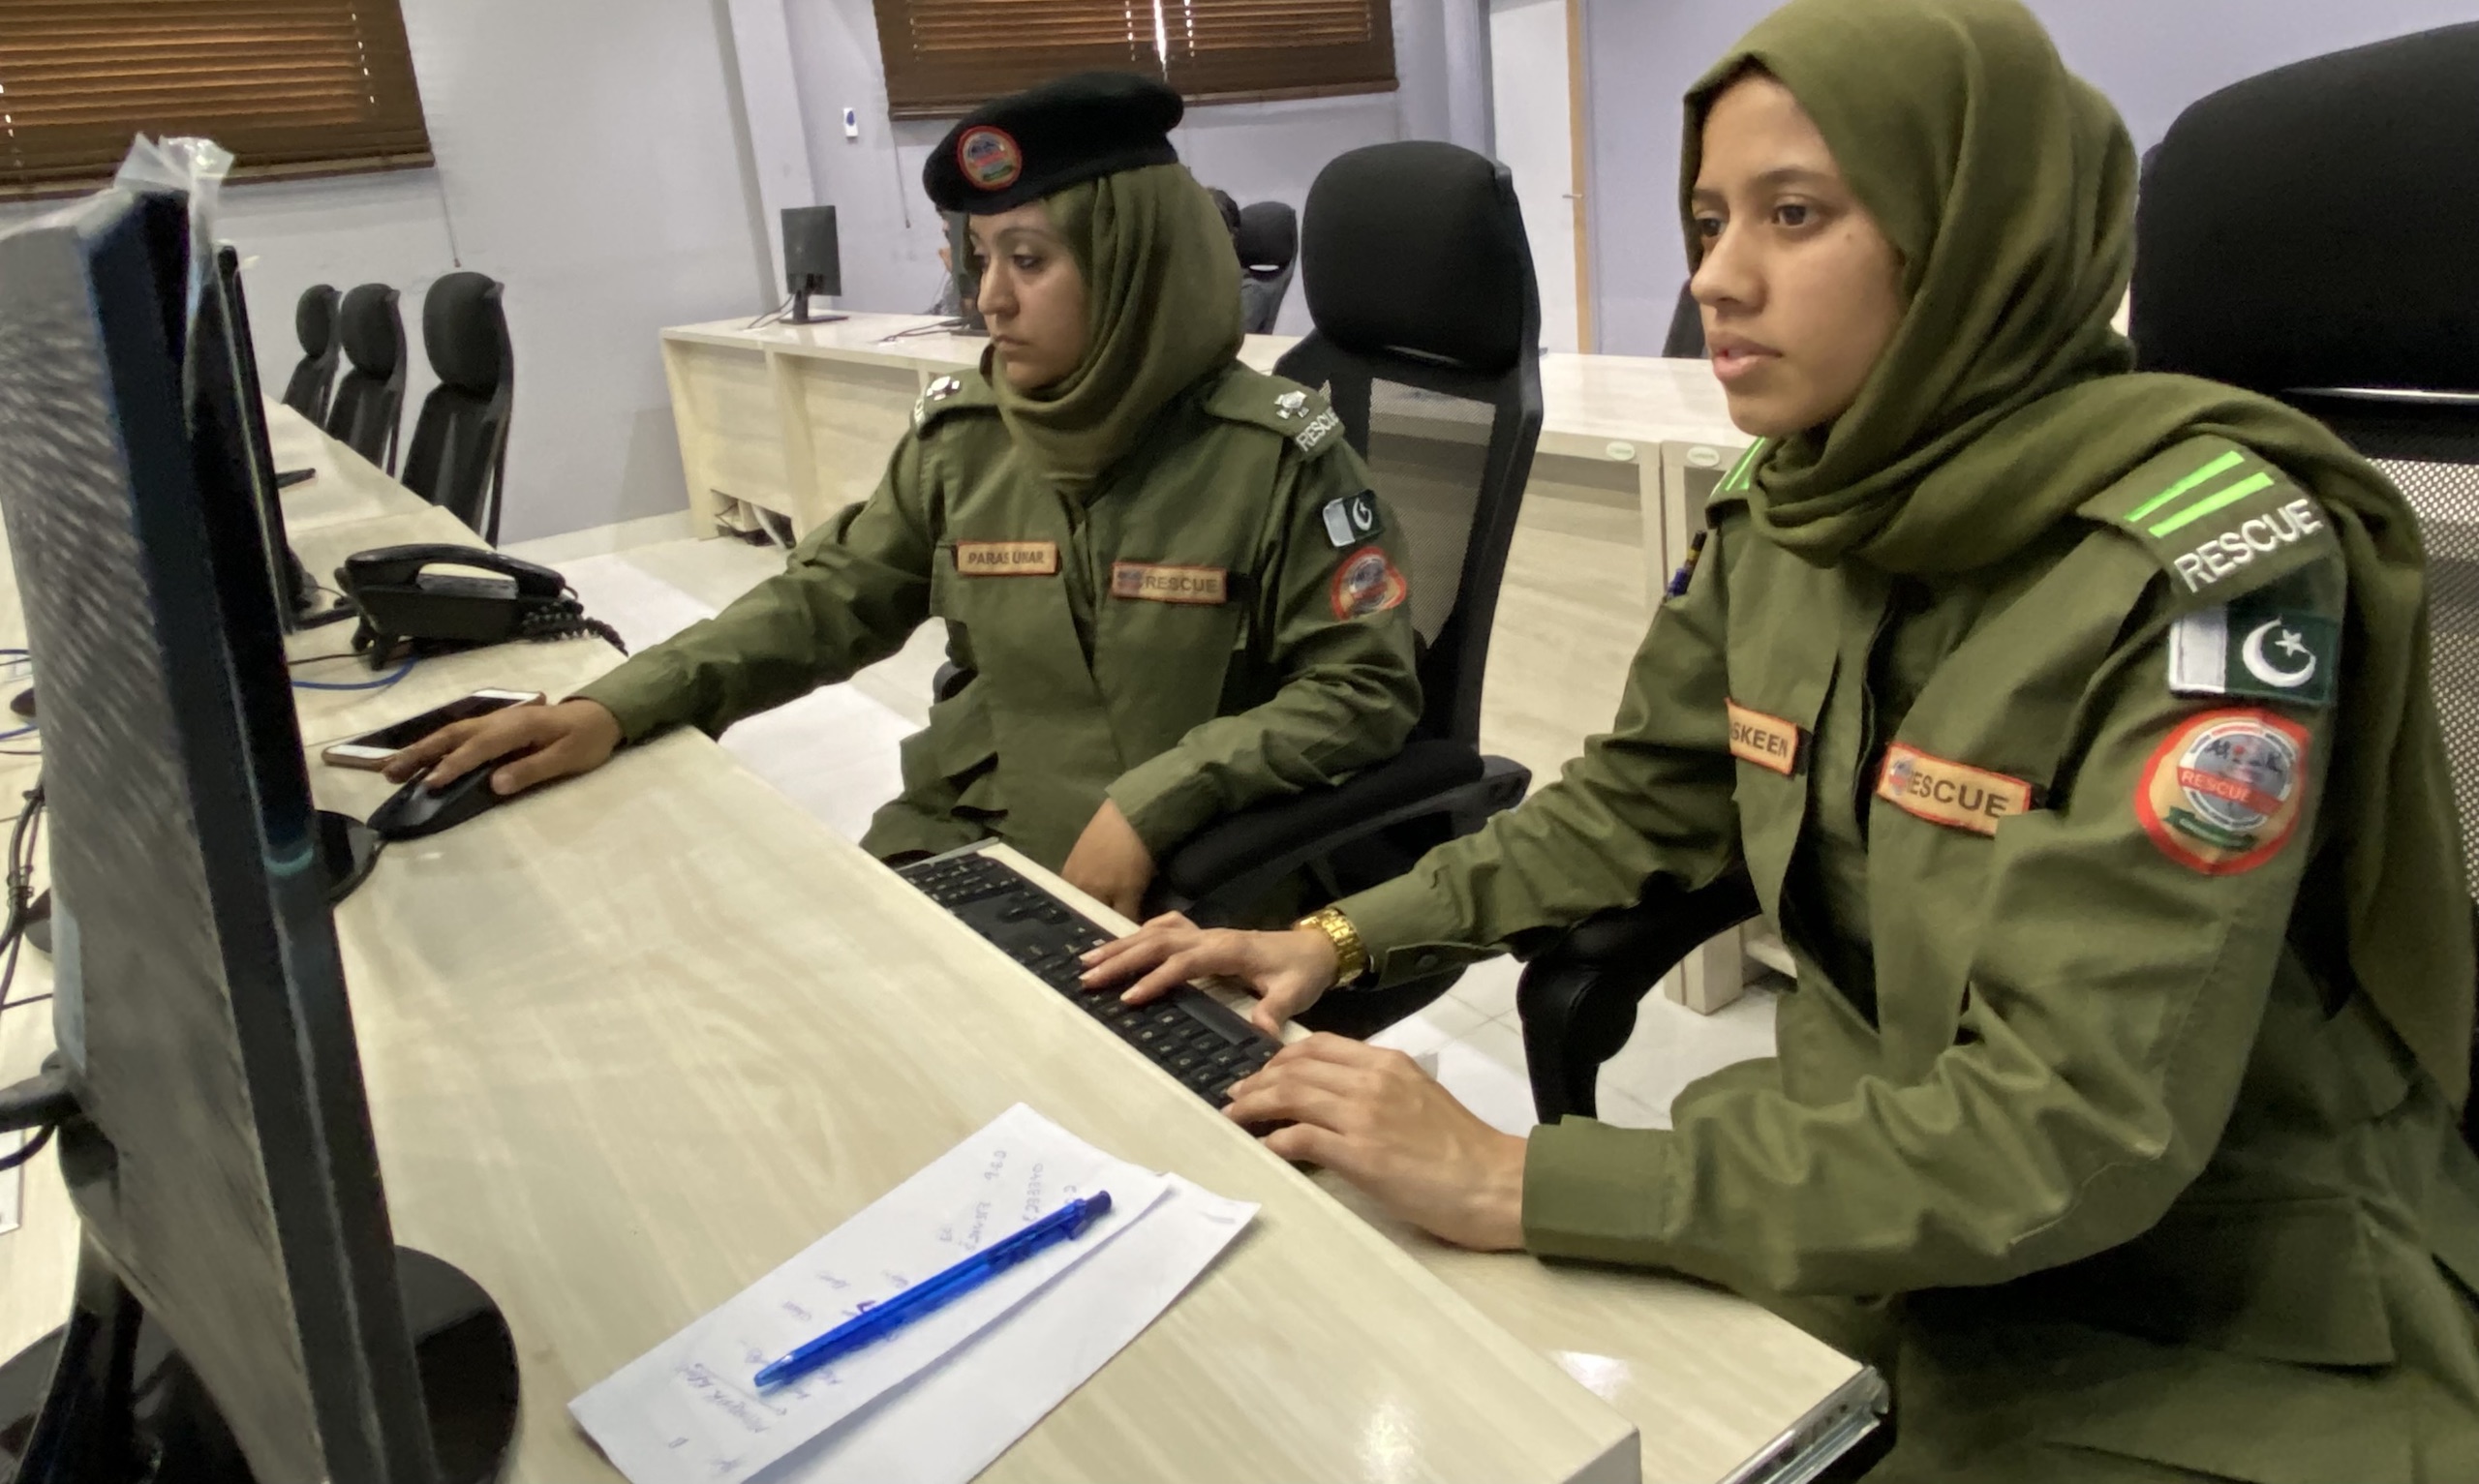 Two women in camoflague green uniform sat at a desk in front of a computer